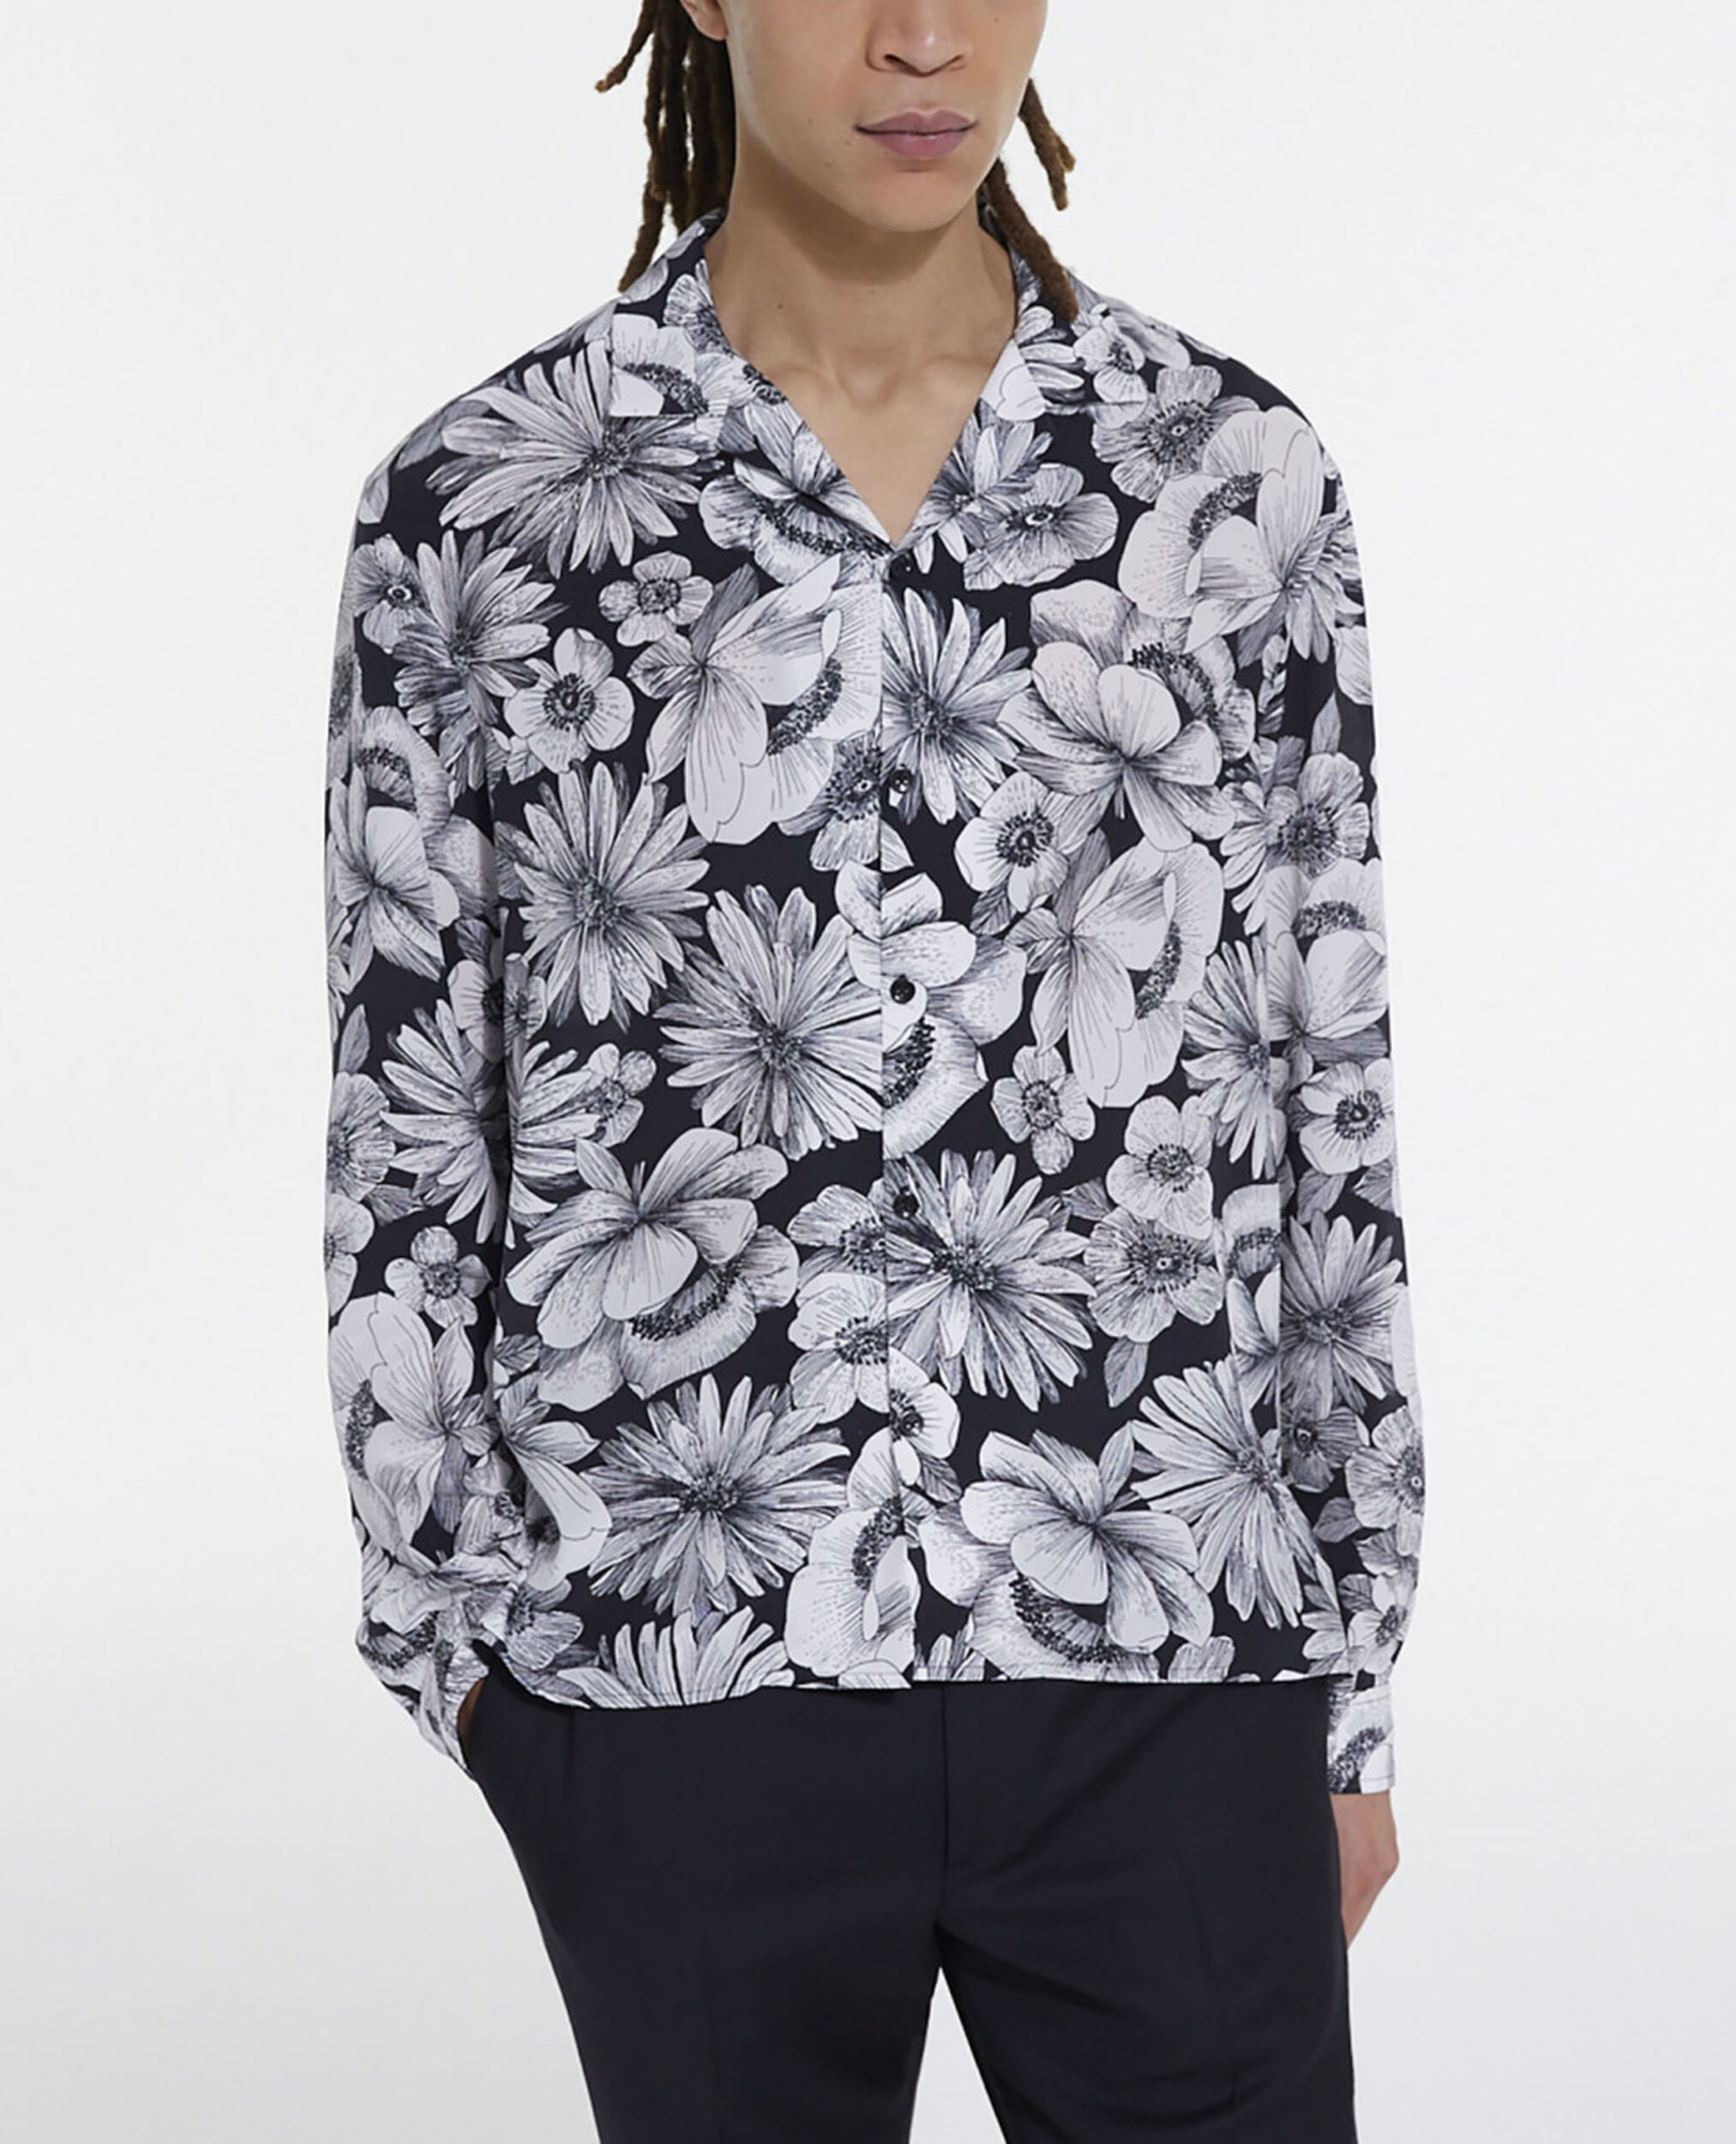 Camisa floral con cuello hawaiano, BLACK WHITE, hi-res image number null